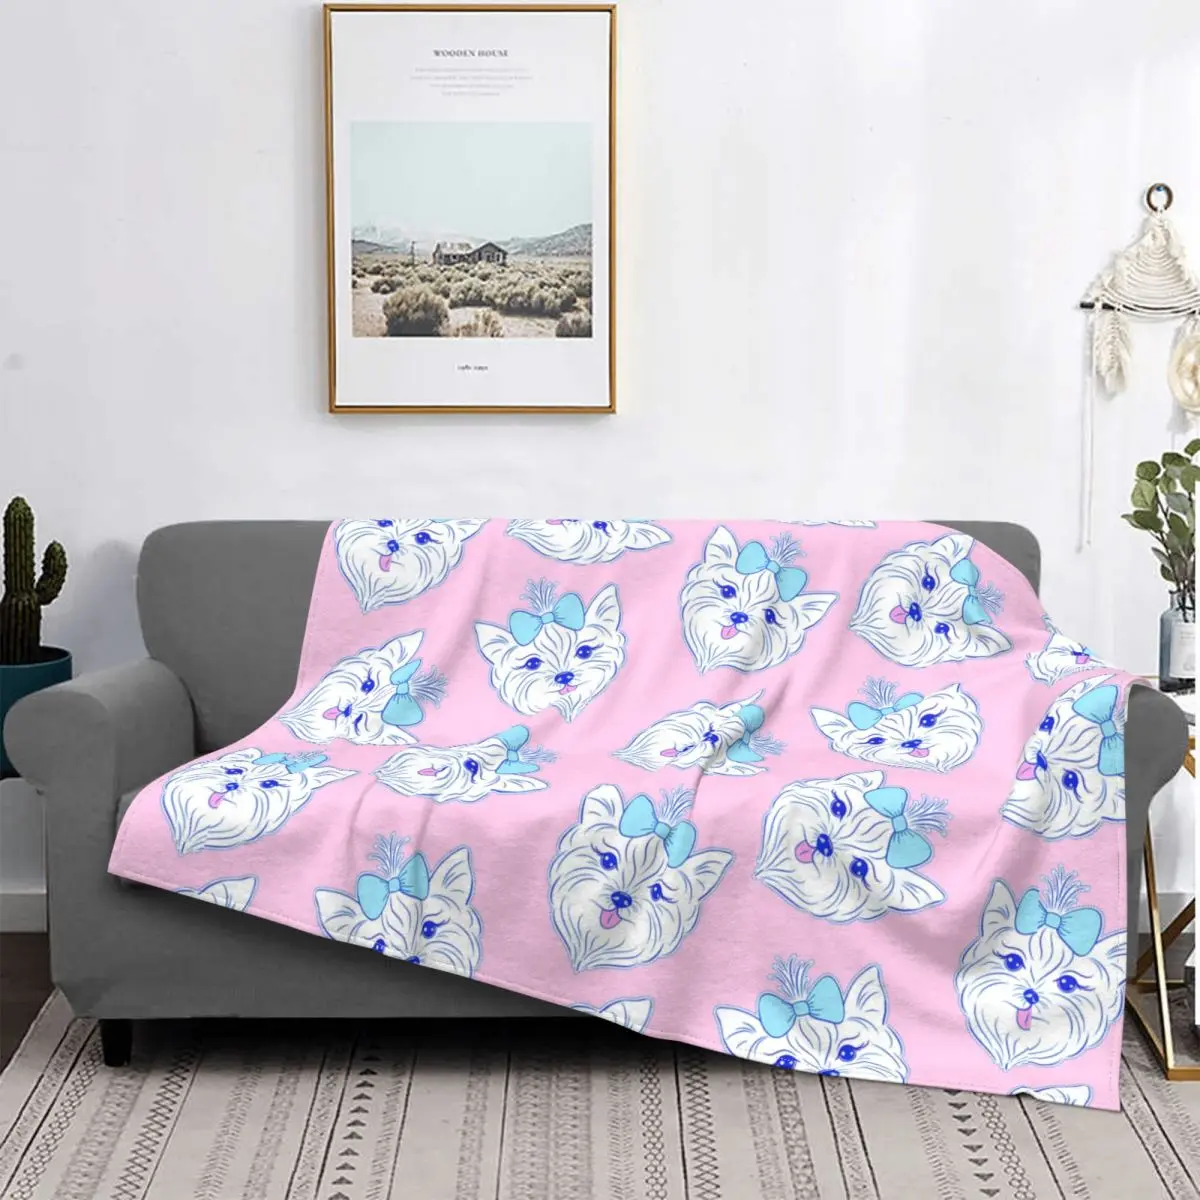 

Yorkshire Terrier Plaid Anime Blankets Flannel Cute Dog Animal Breathable Super Soft Throw Blankets for Sofa Bedroom Rug Piece